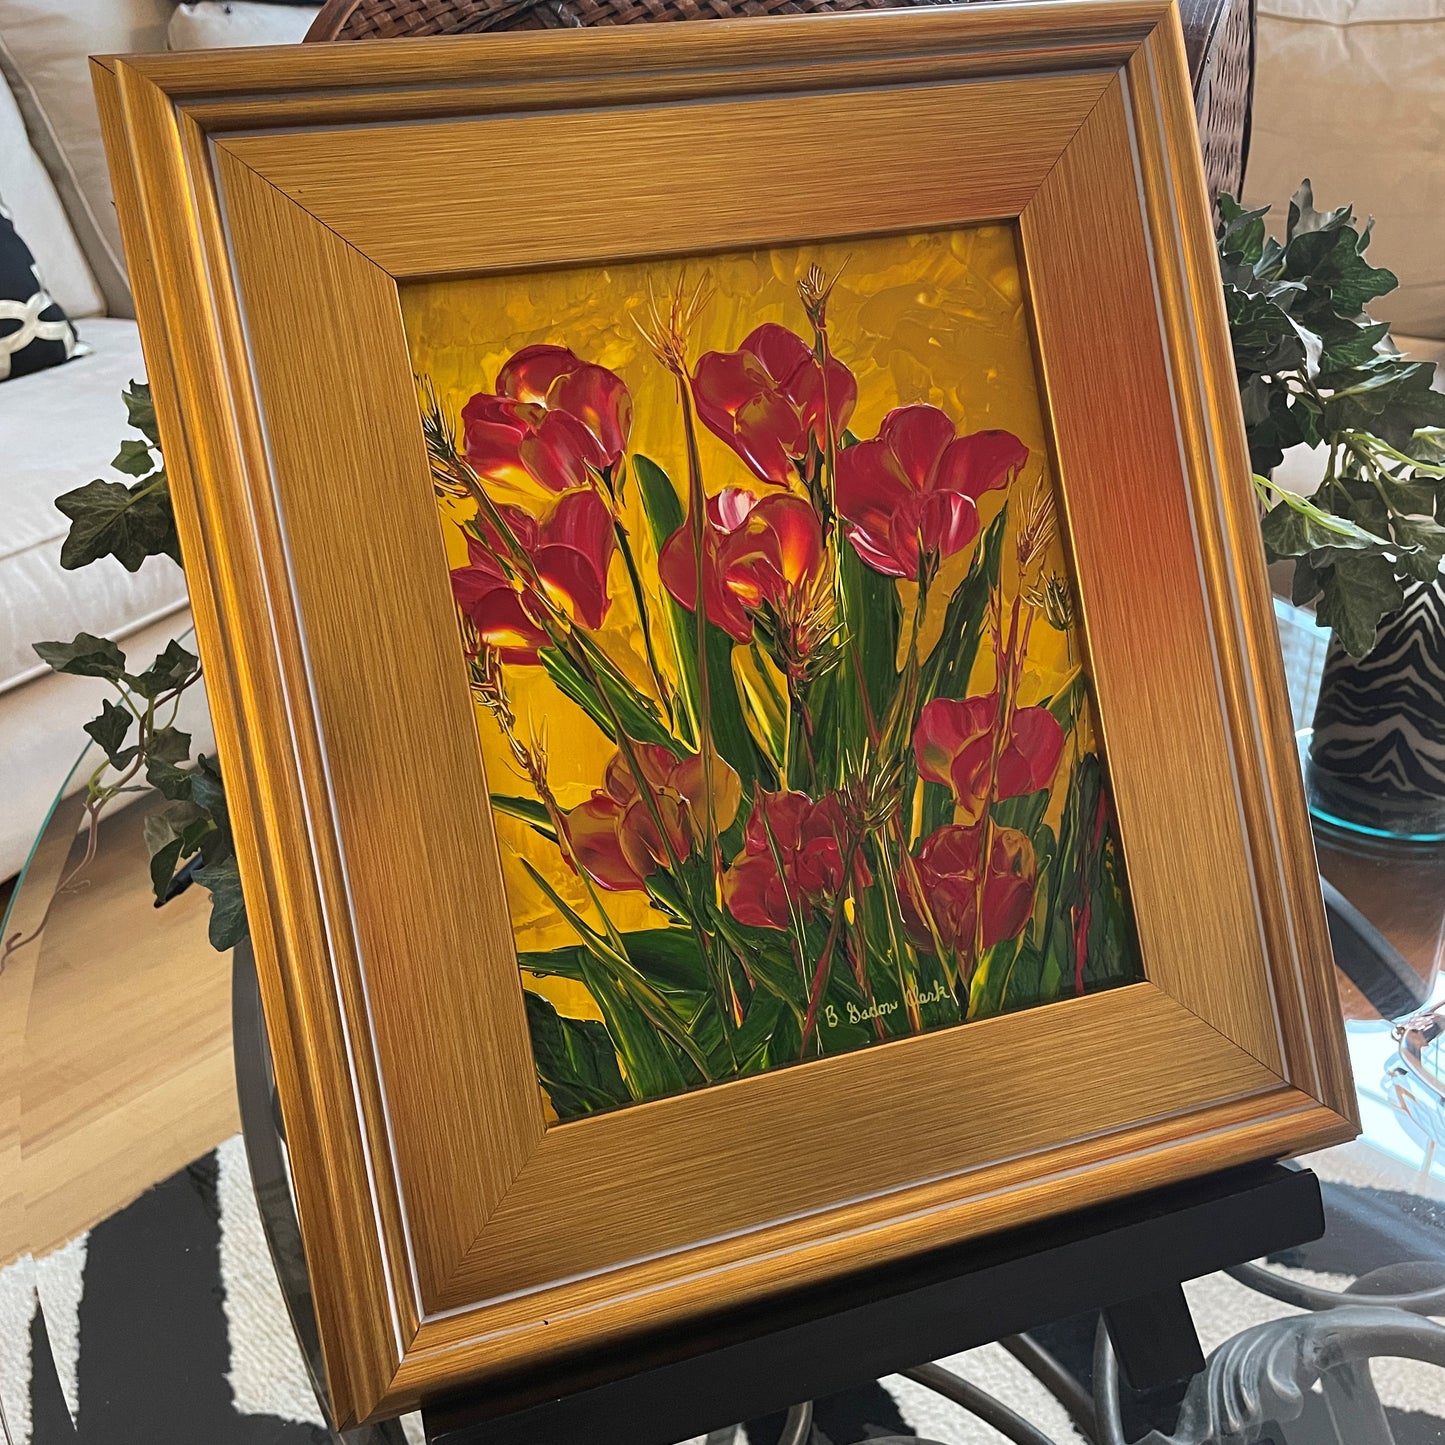 Original Painting of Abstract Tulips in Frame by Brenda Gadow Clark